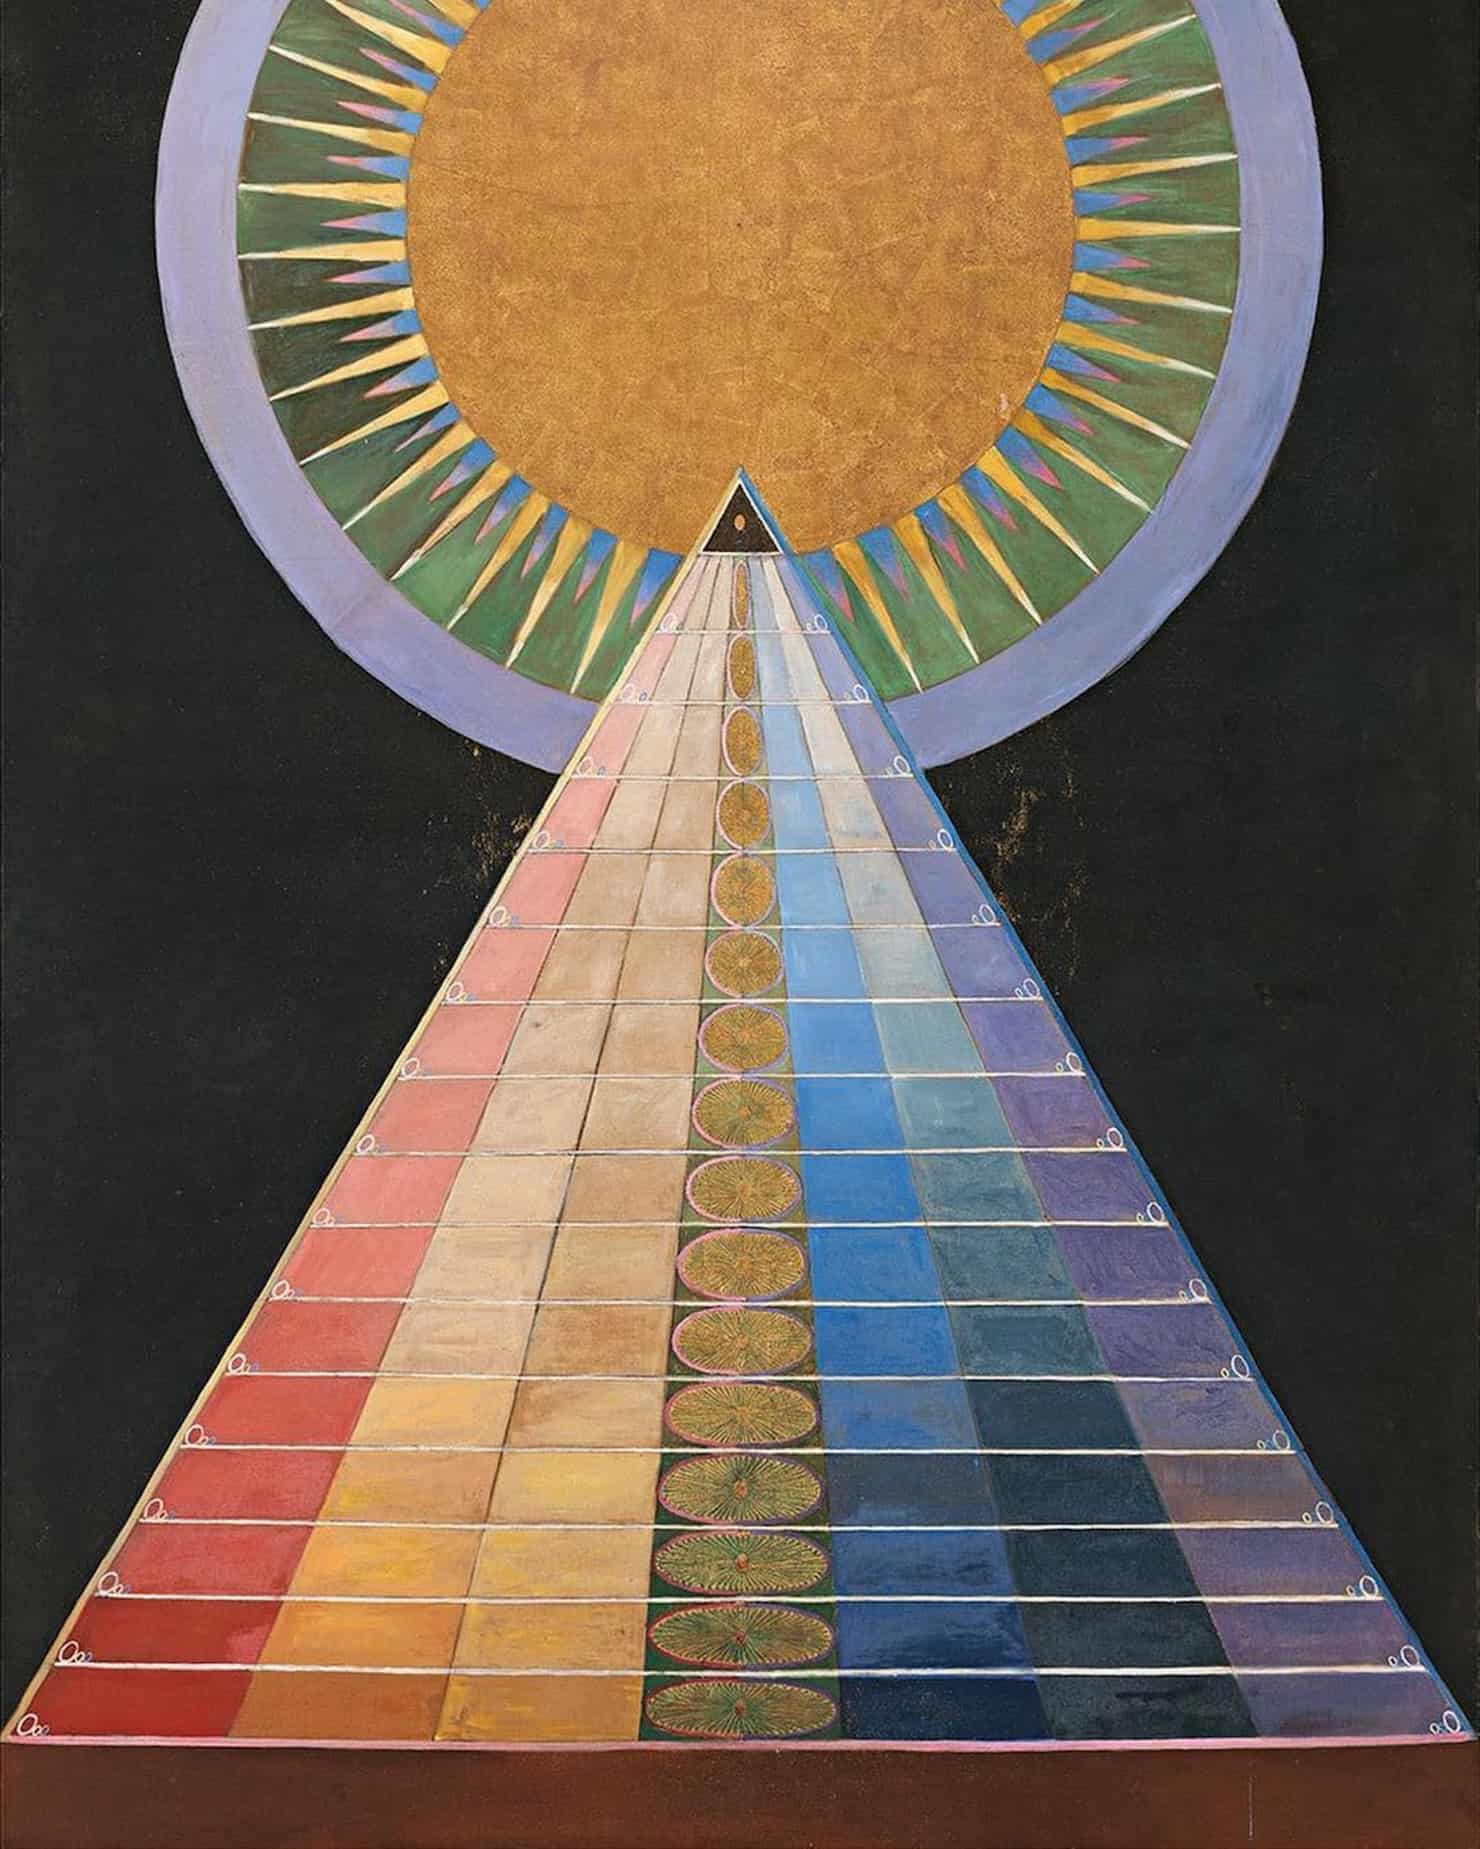 Hilda af Klint Paintings for the future exhibition guggenheim